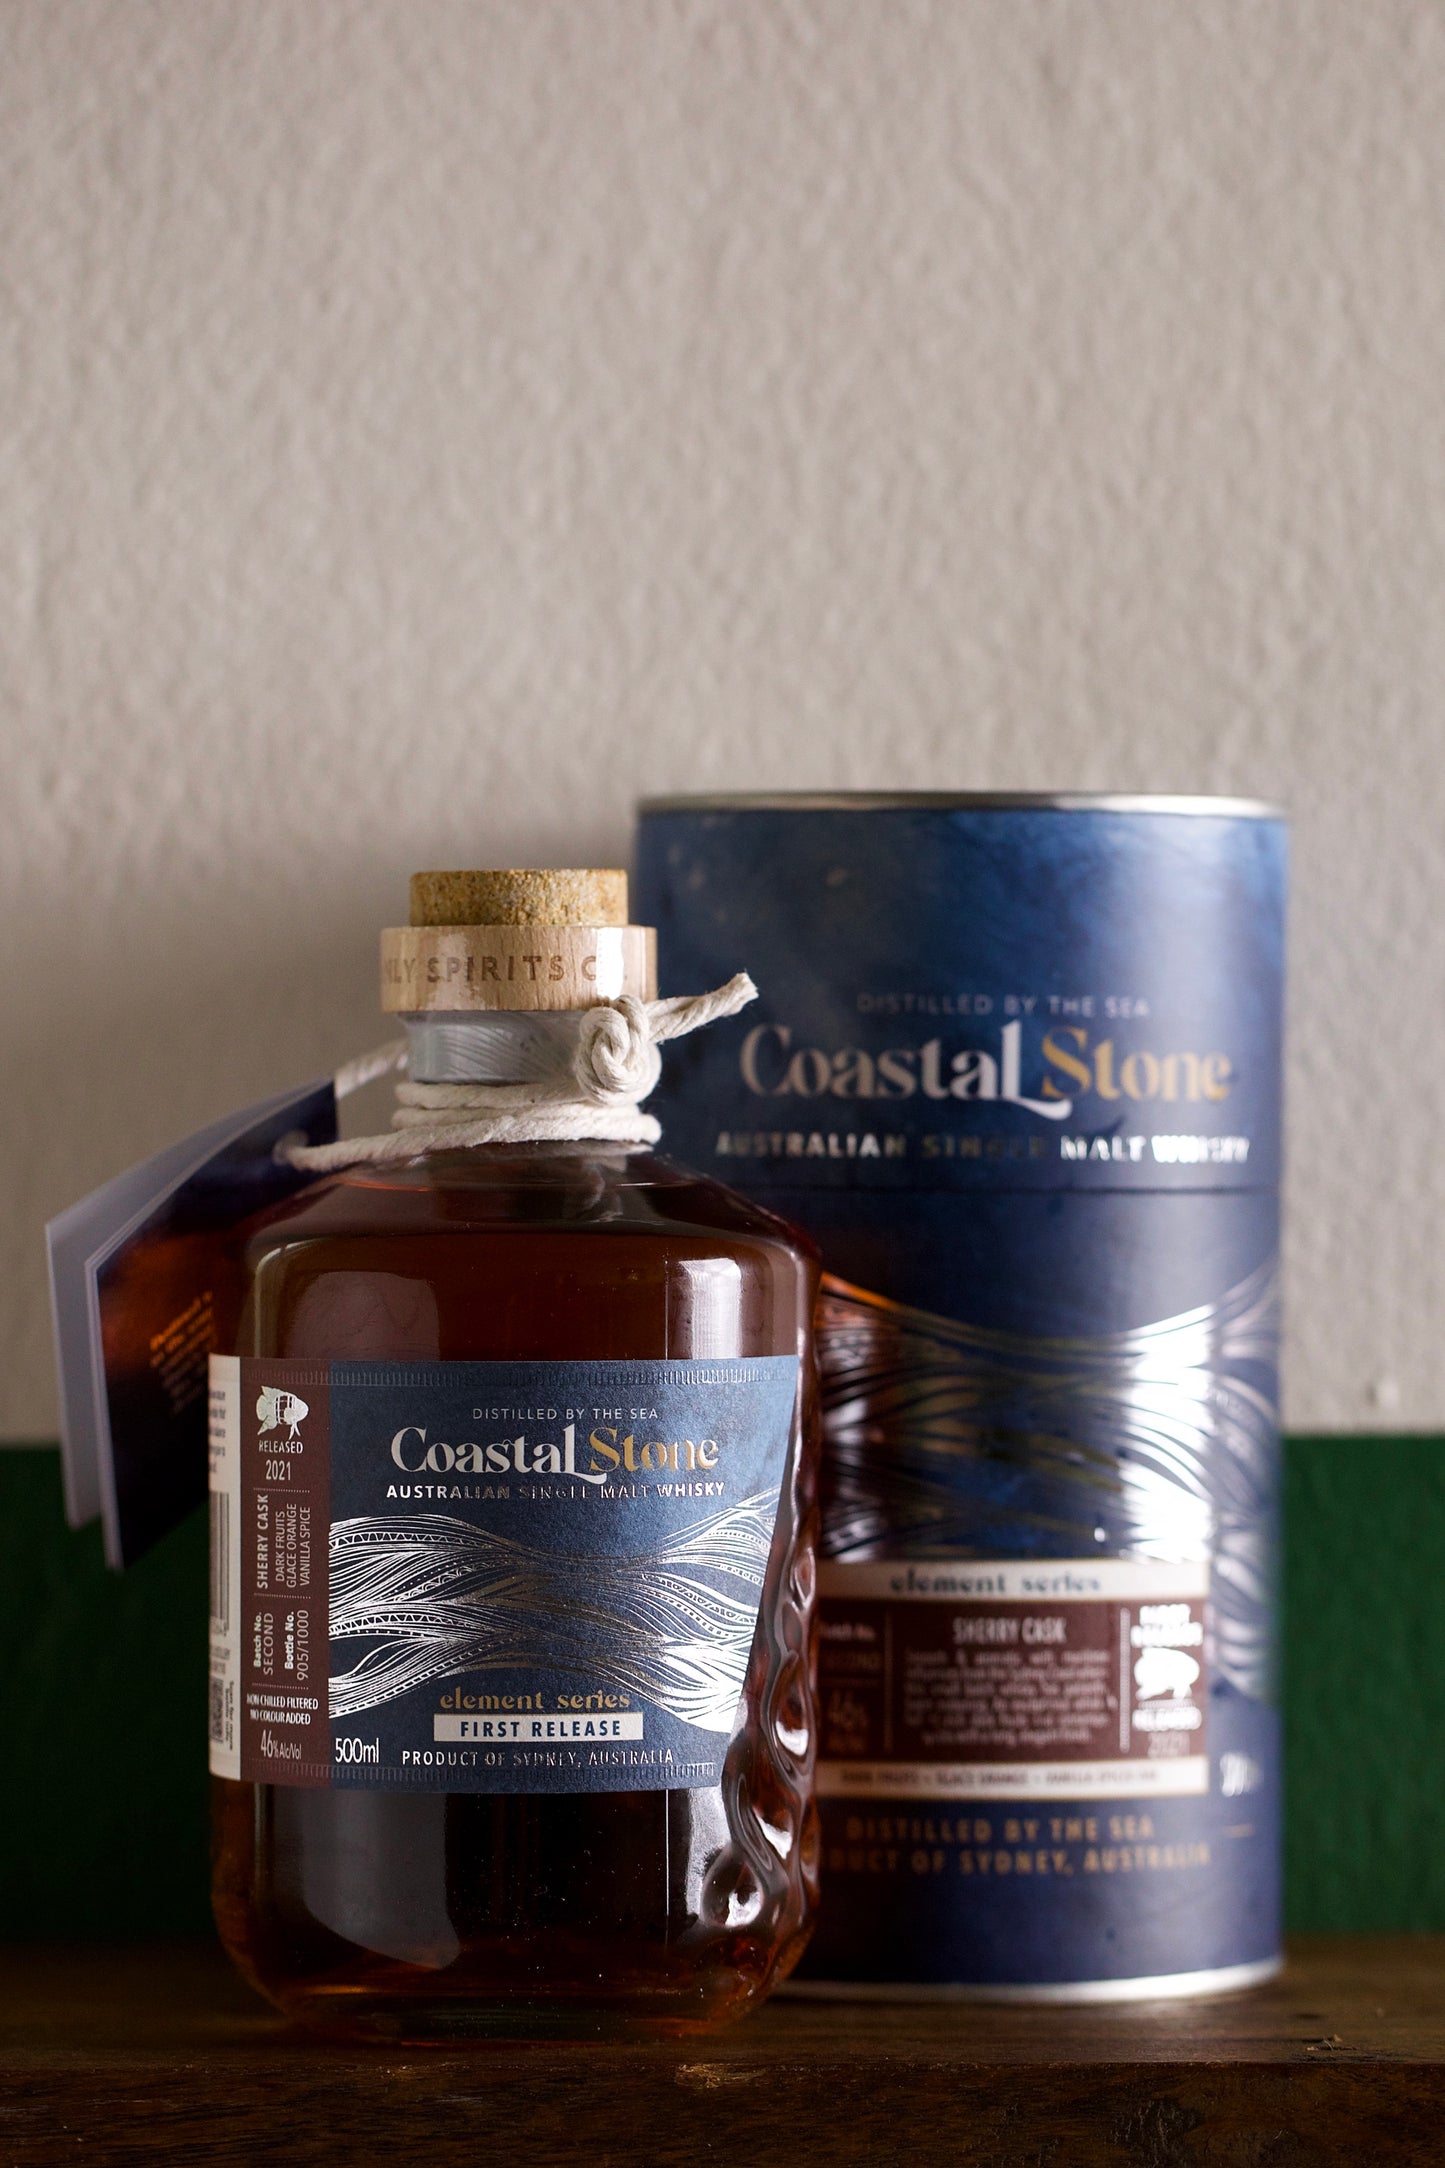 Bottle of Manly Spirits 'Coastal Stone' Whisky (Sherry Cask - First Release) 500ml